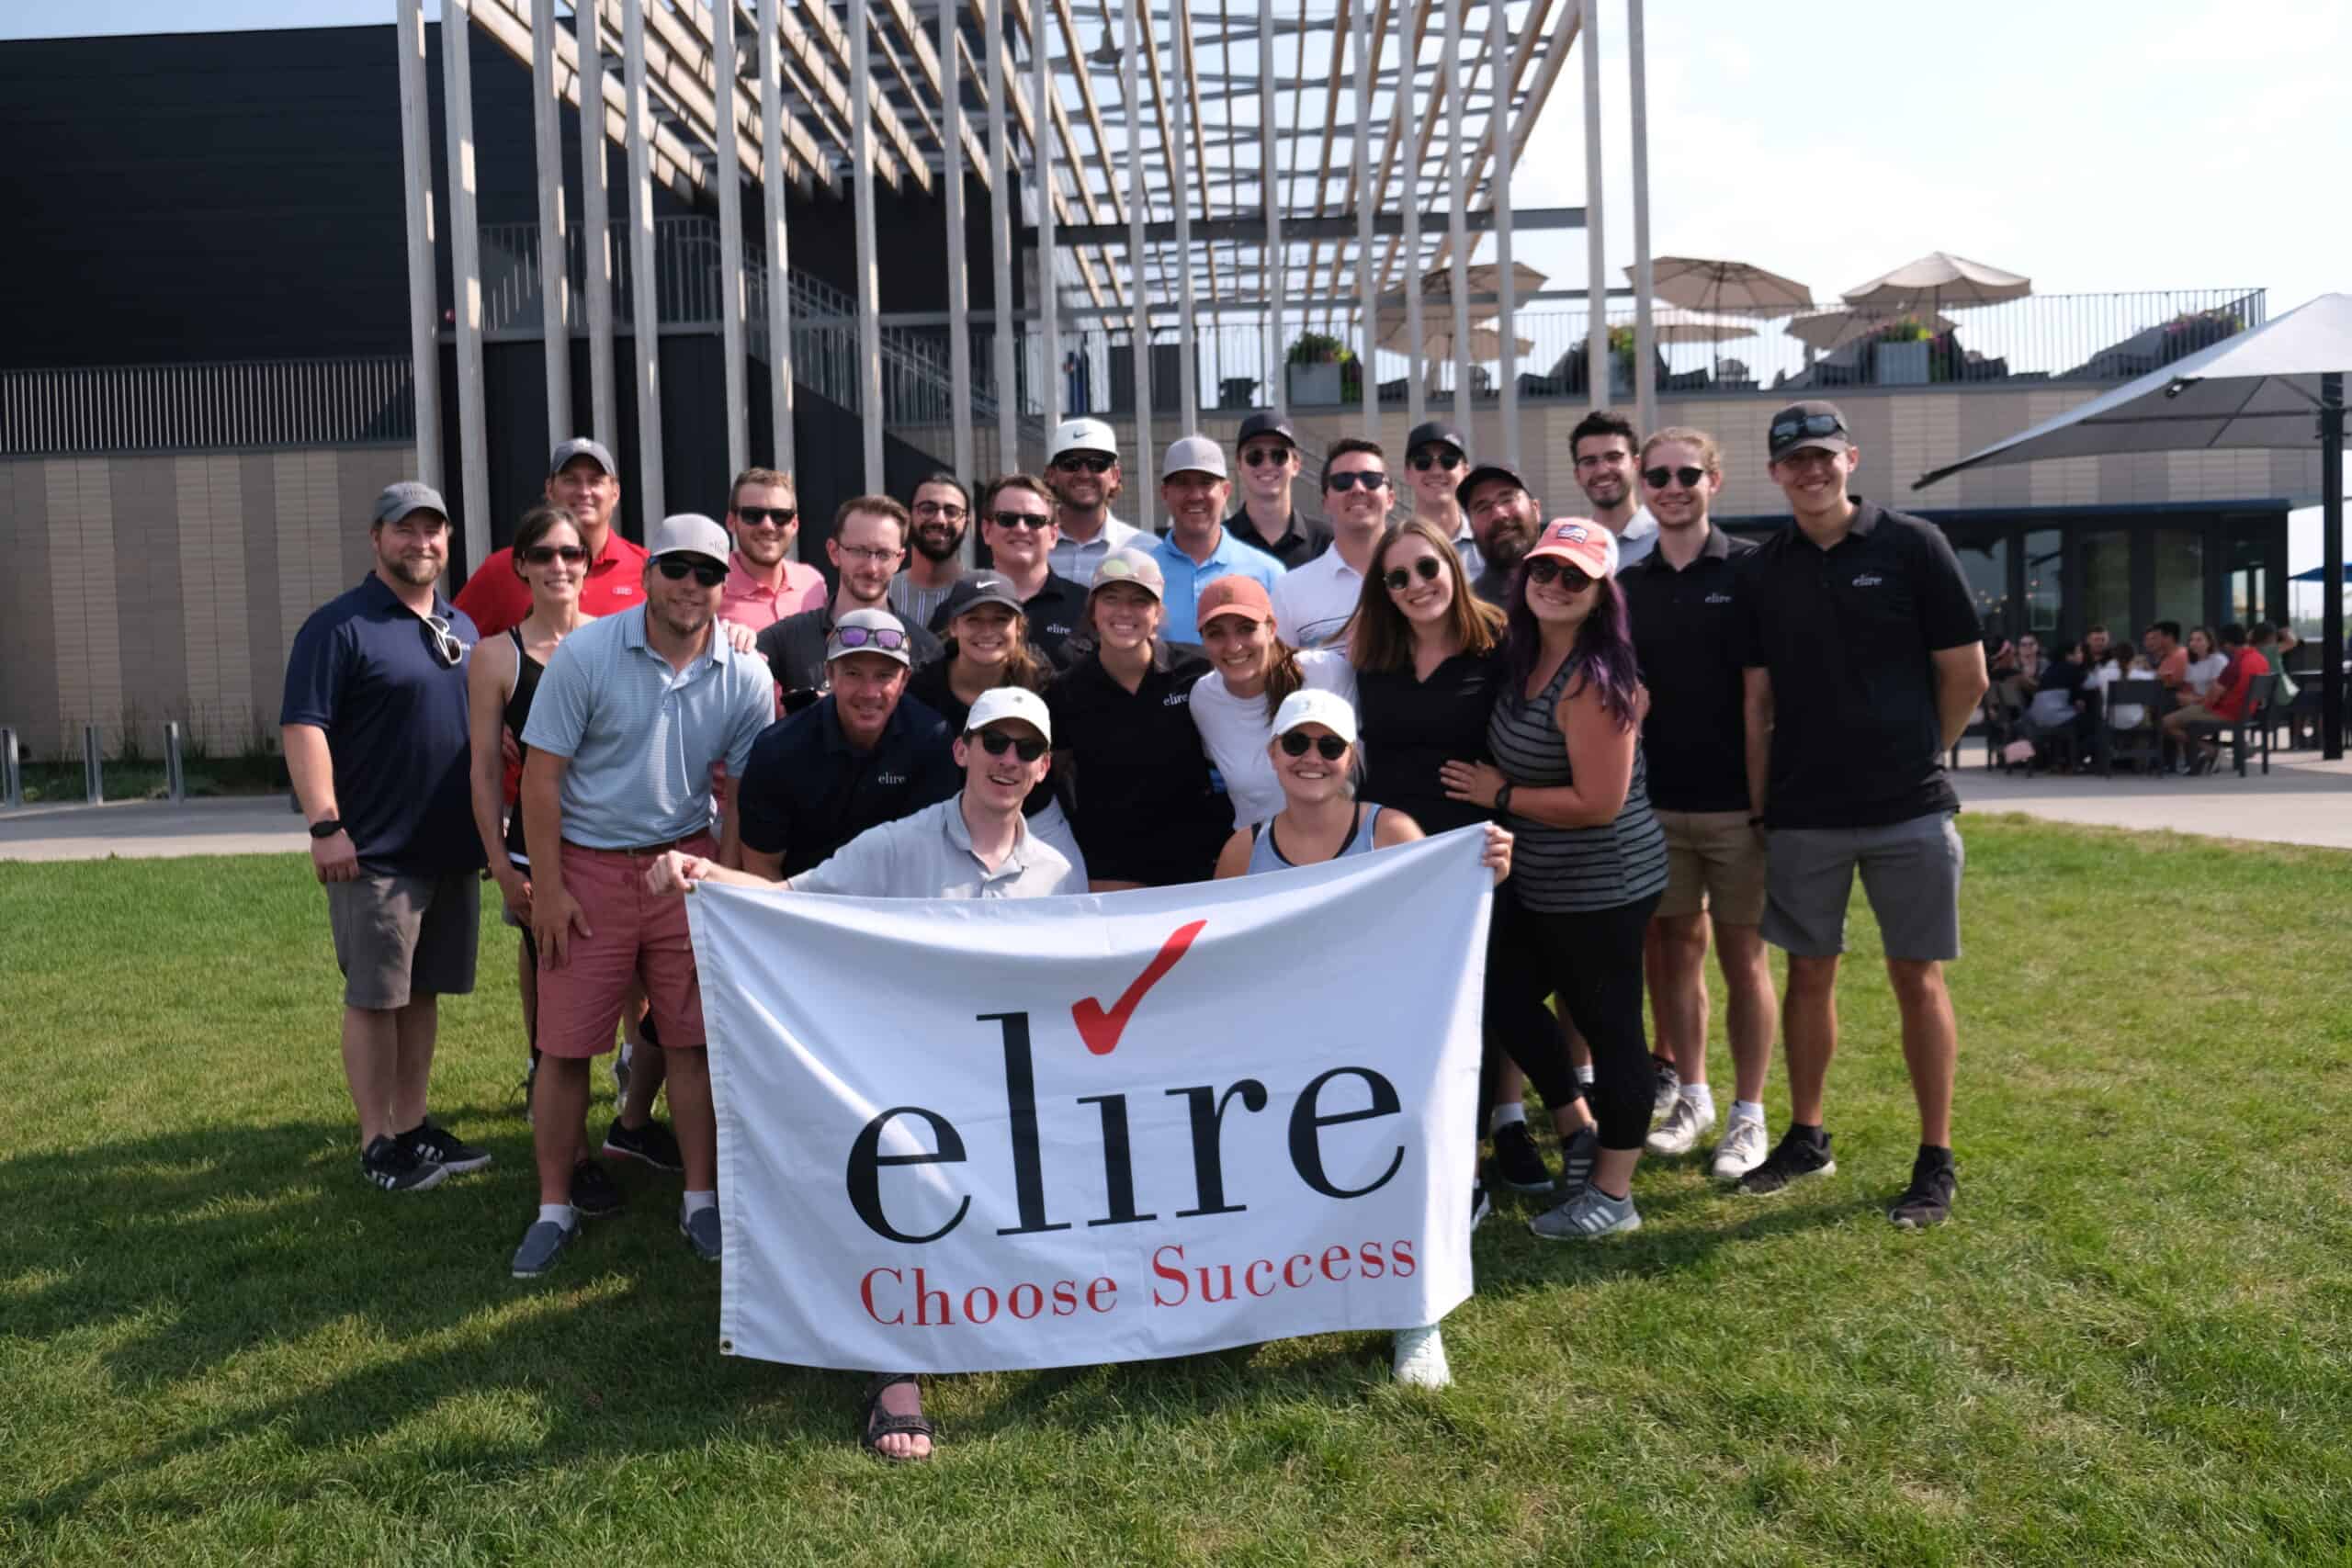 Team elire at golf / lawn bowling event